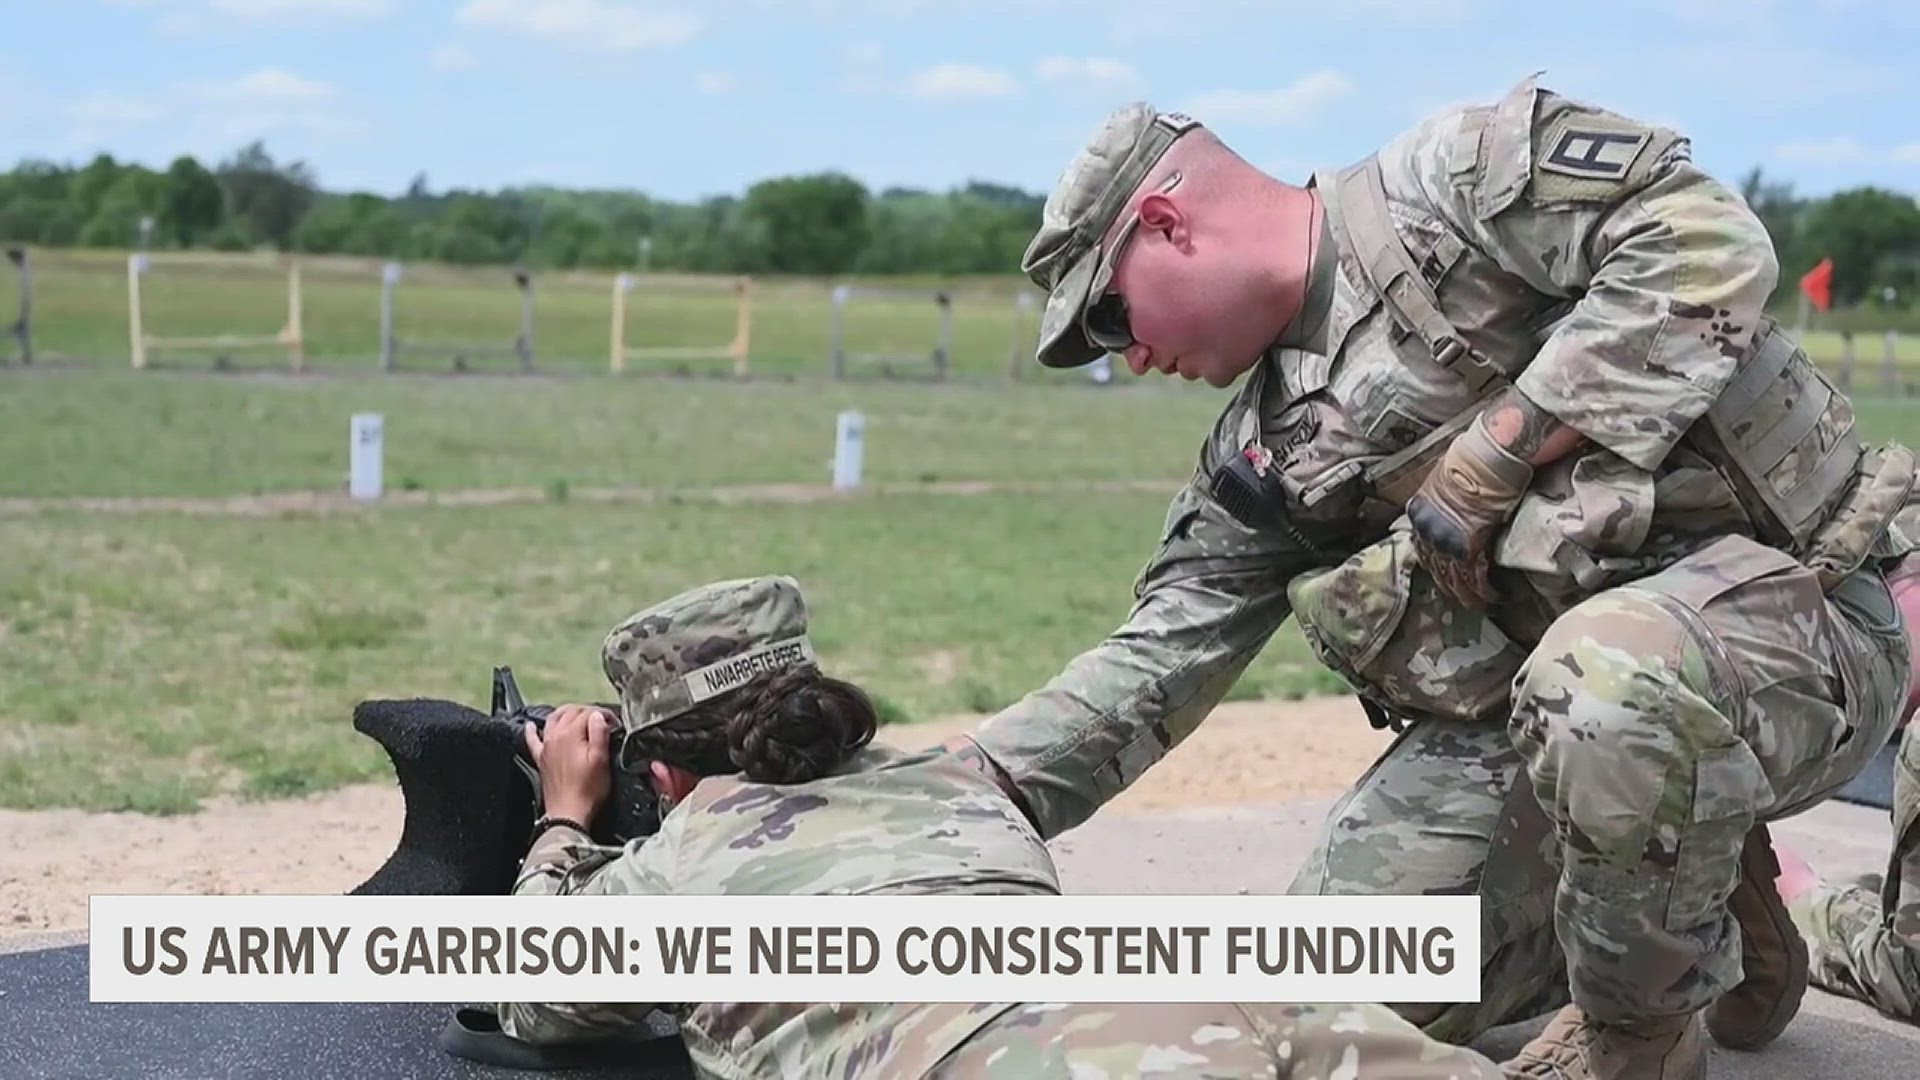 The statement said that more consistent and predictable funding is needed "to responsibly manage the resources allocated to equip and sustain soldiers."